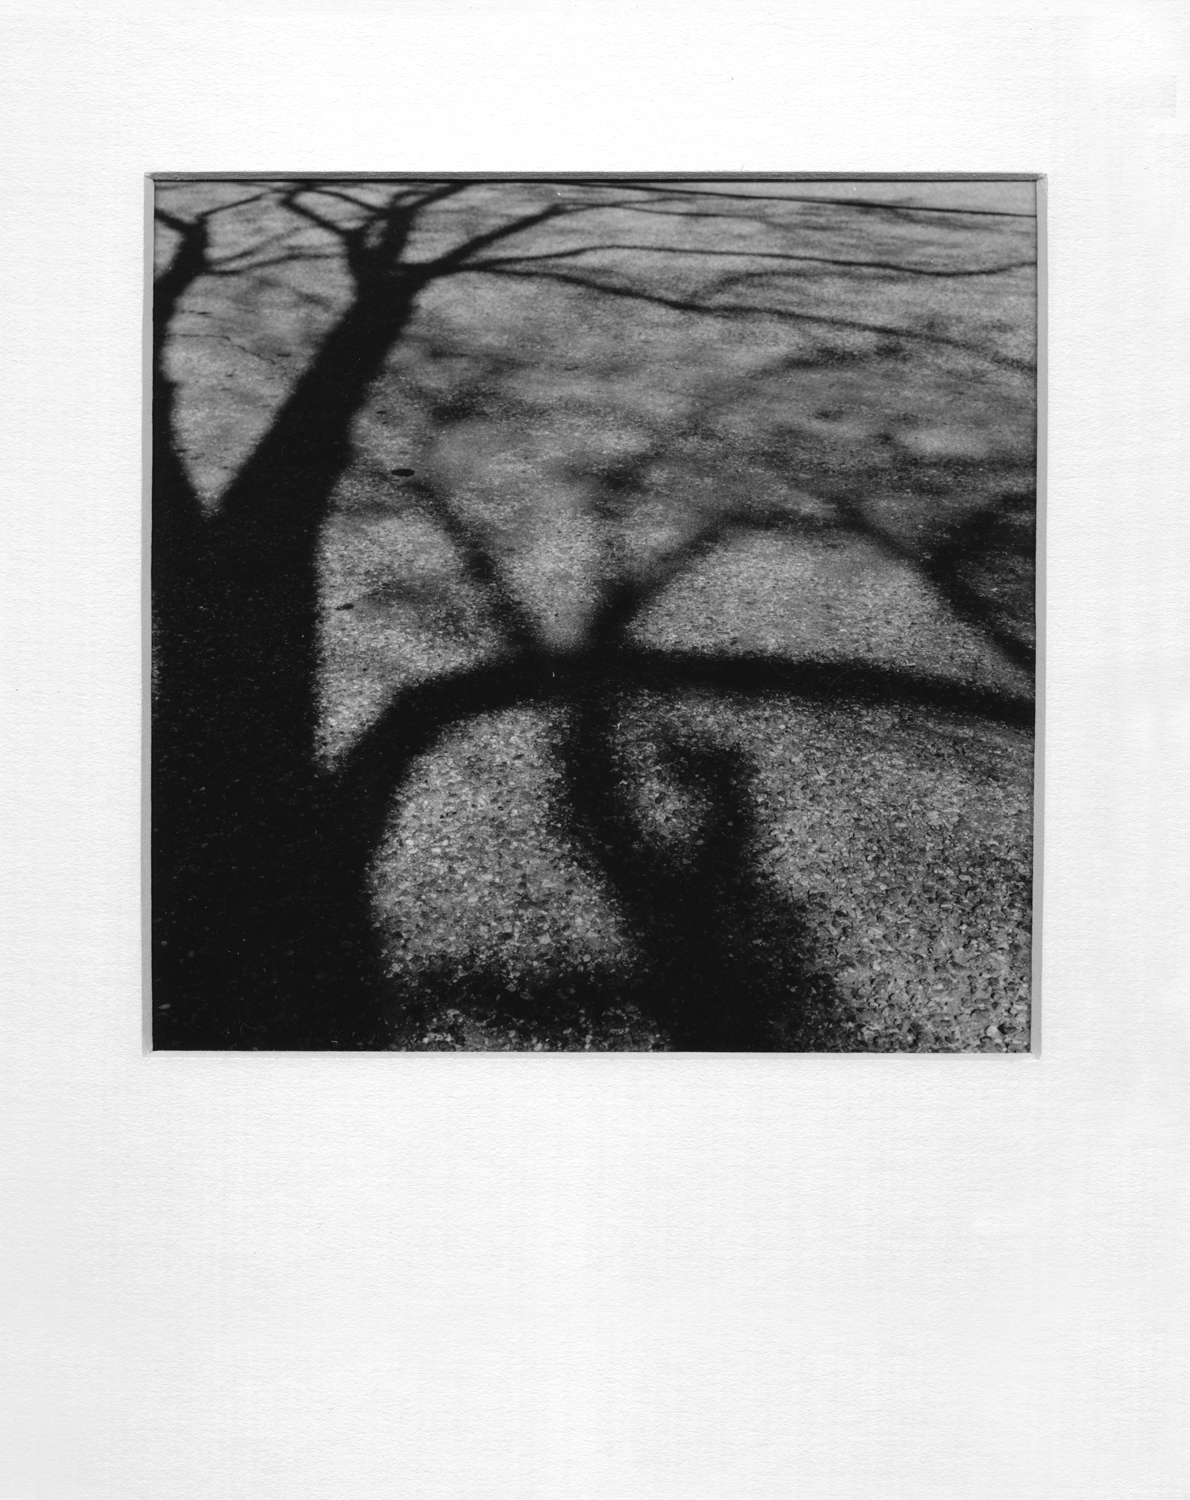 Lindsey Best trees Shadows Shadows As Subjects Nature black and white darkroom prints rolleiflex Hasselblad